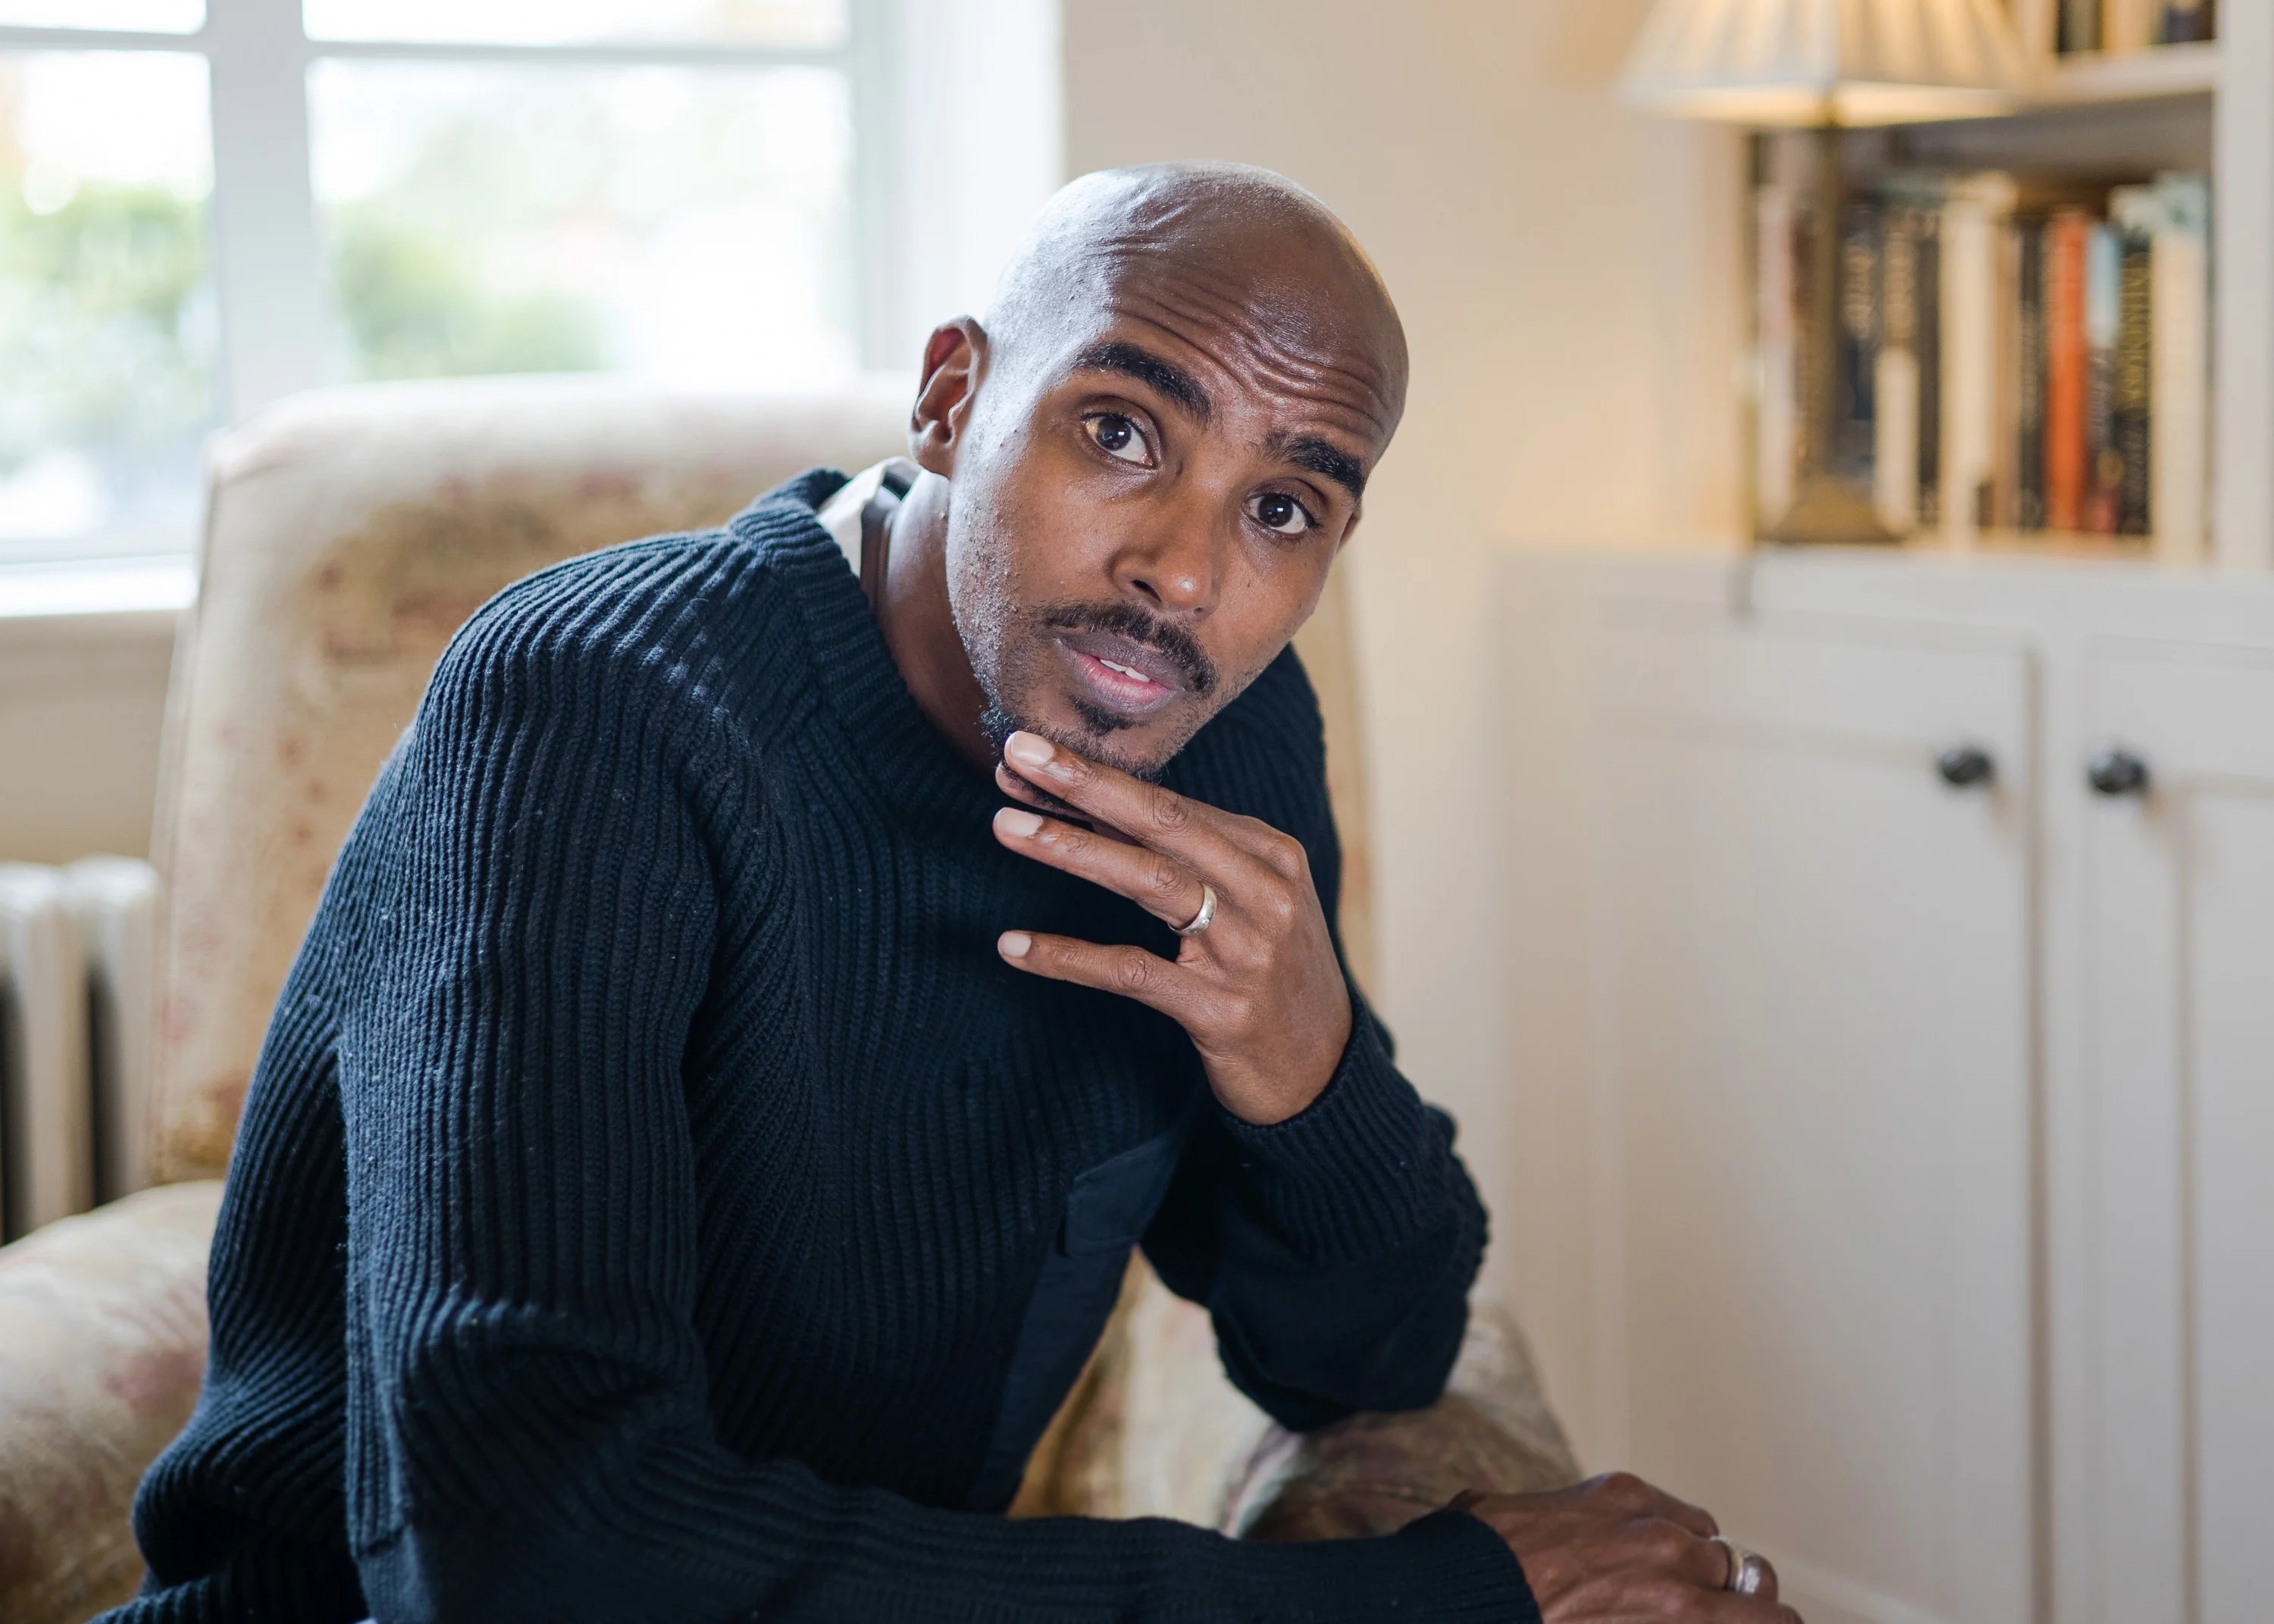 Mo Farah, Trafficked as a child, Illegal immigration, Real name disclosure, 3000x2150 HD Desktop